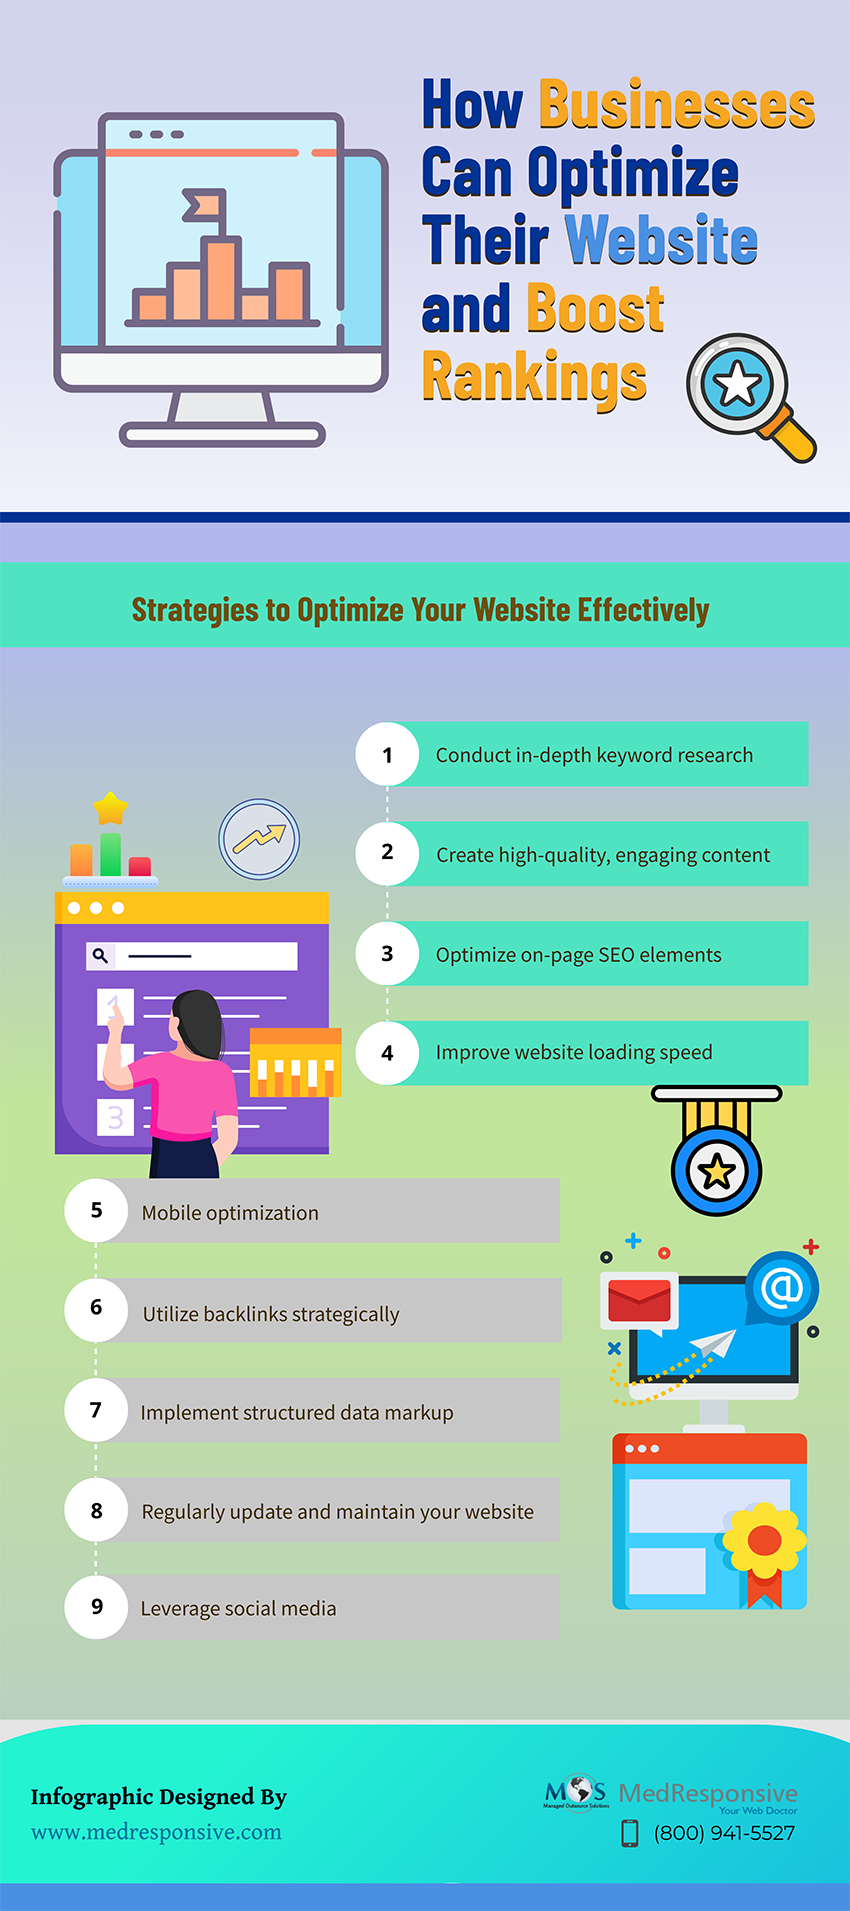 Optimize Your Website and Boost Rankings